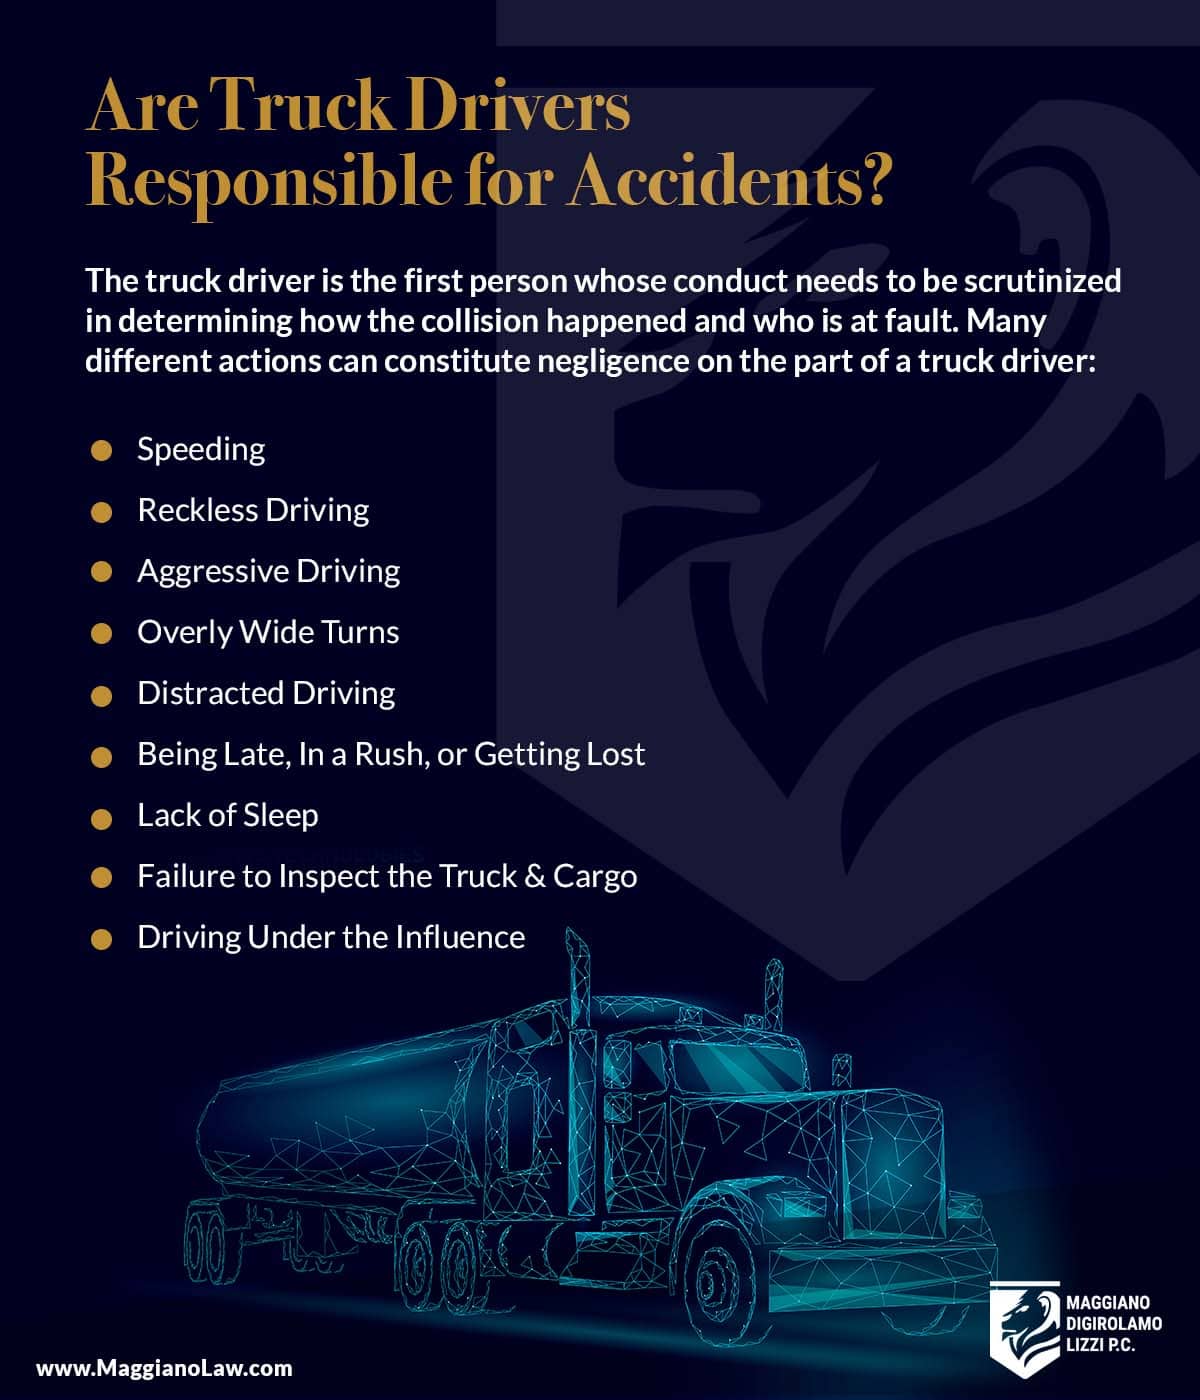 are truck drivers responsible for accidents?